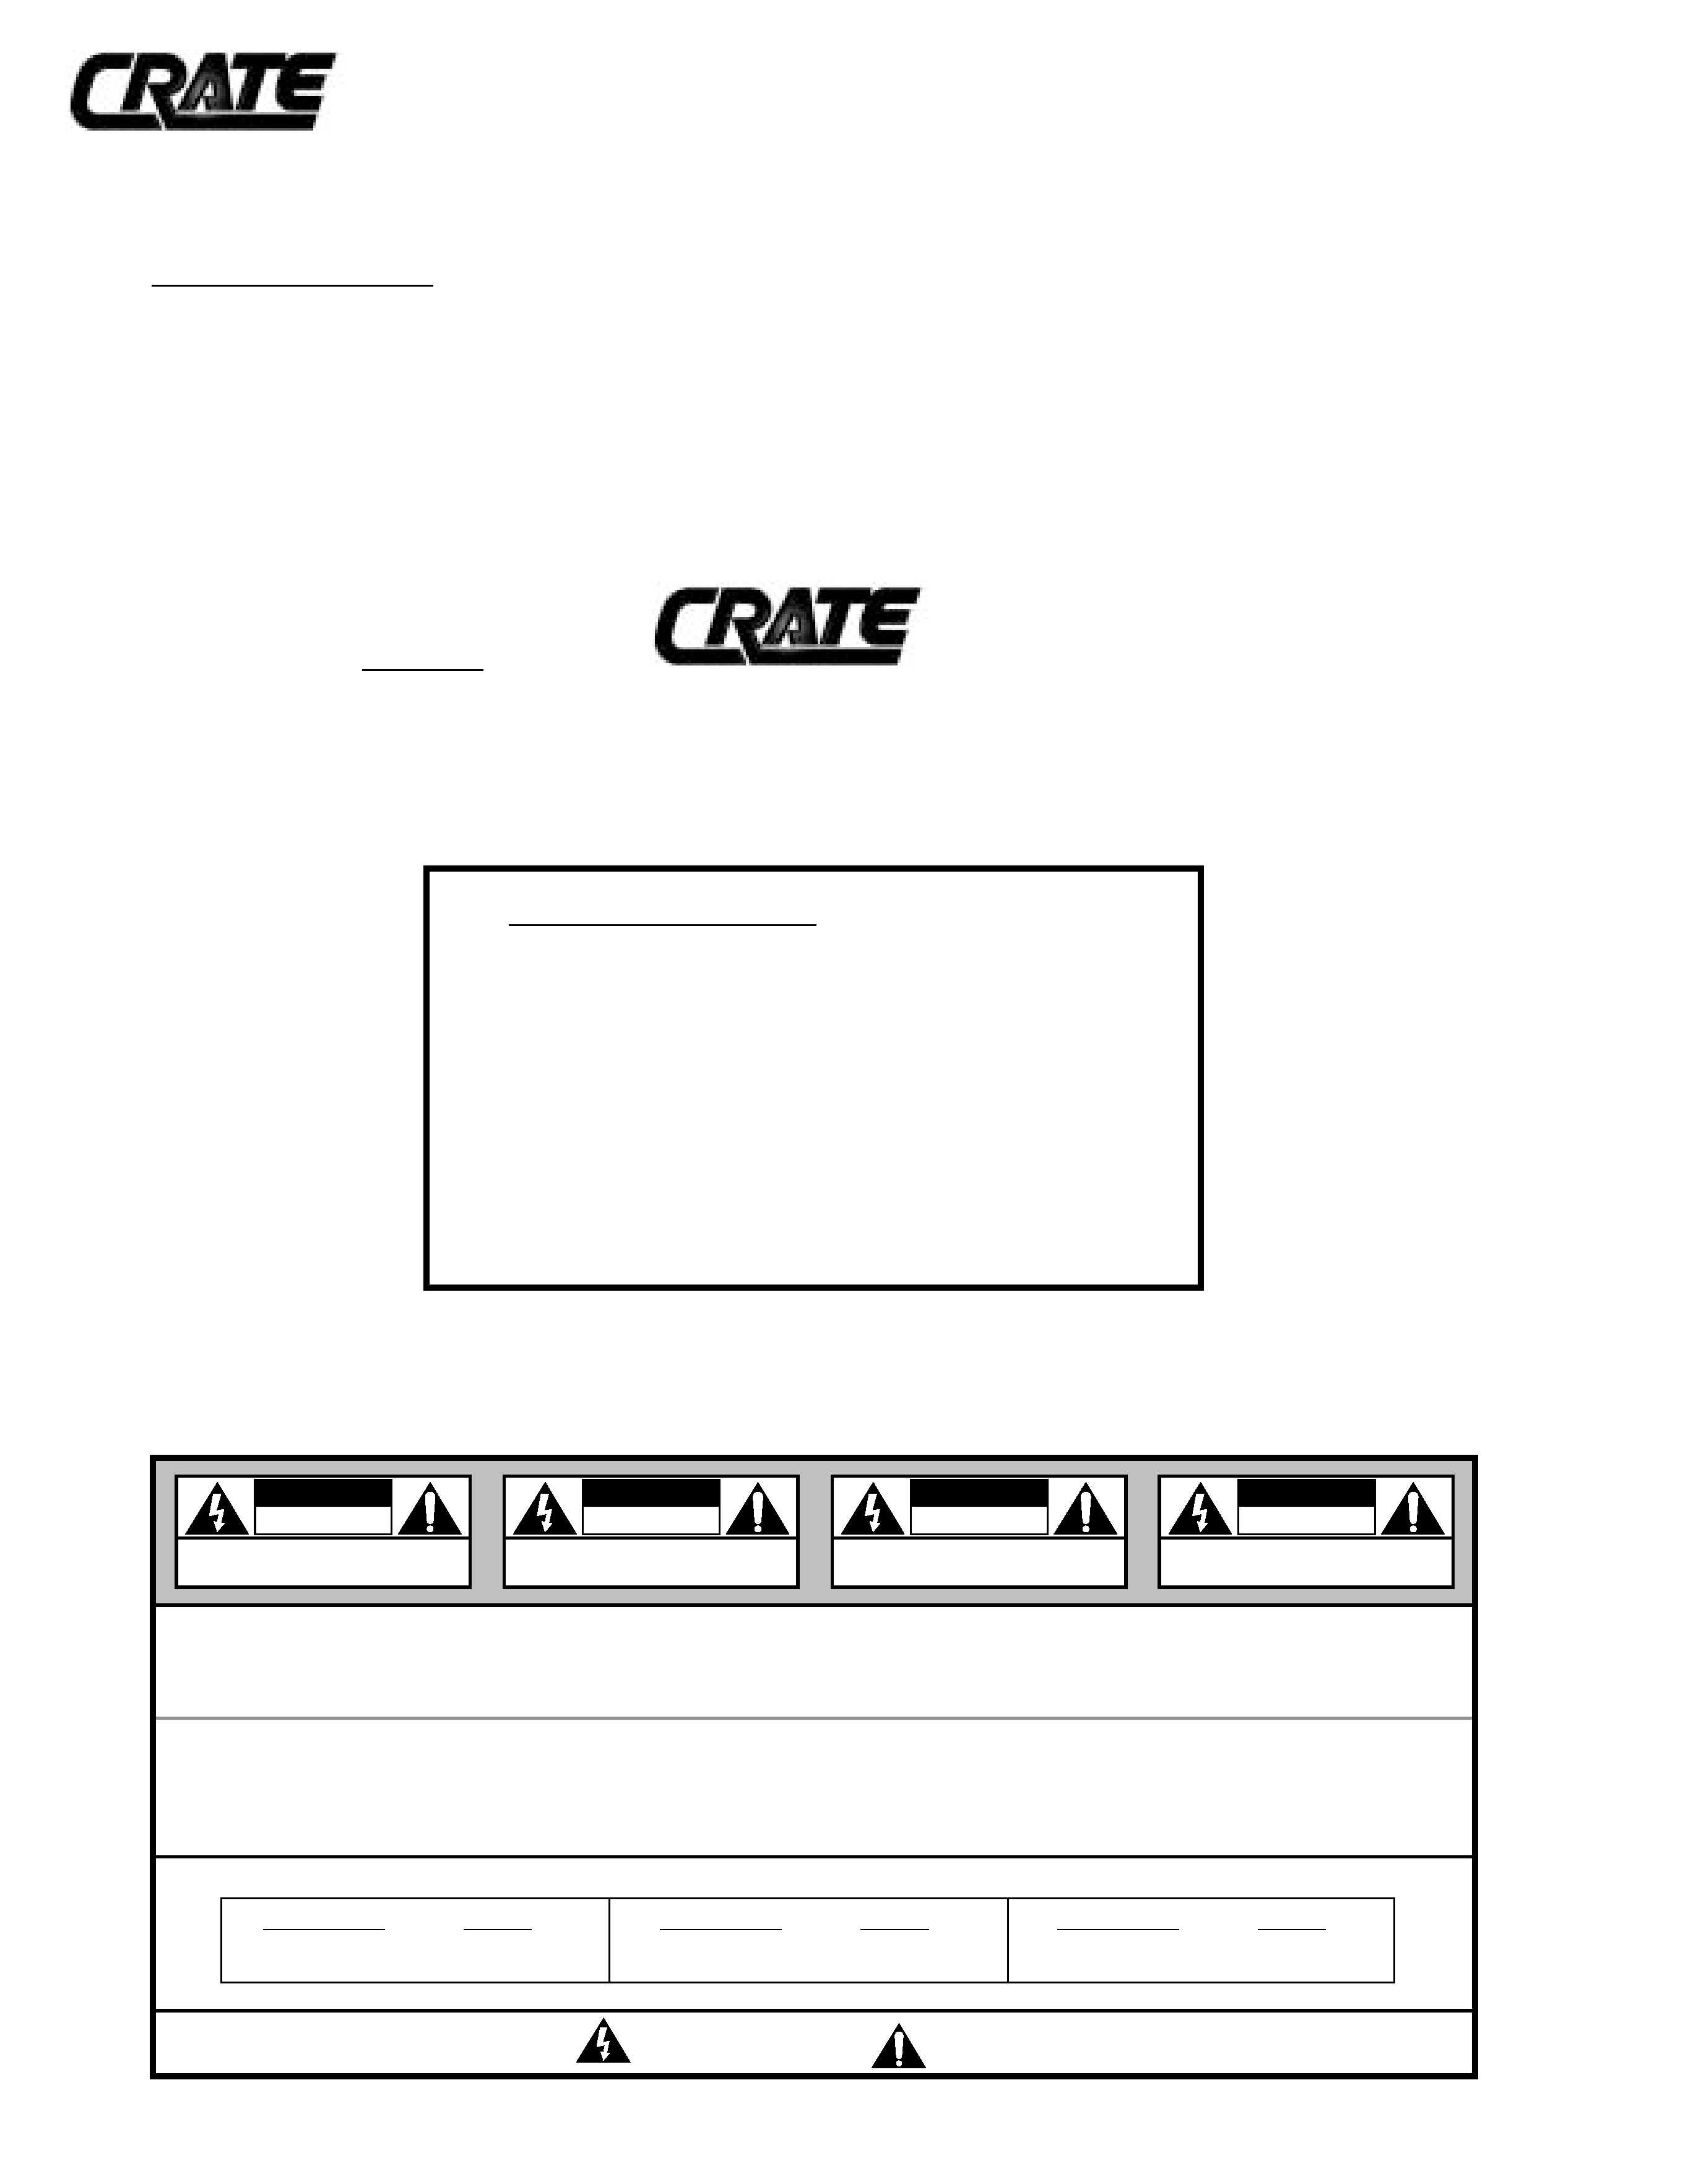 CRATE KX-220 - Owner's Manual Immediate Download